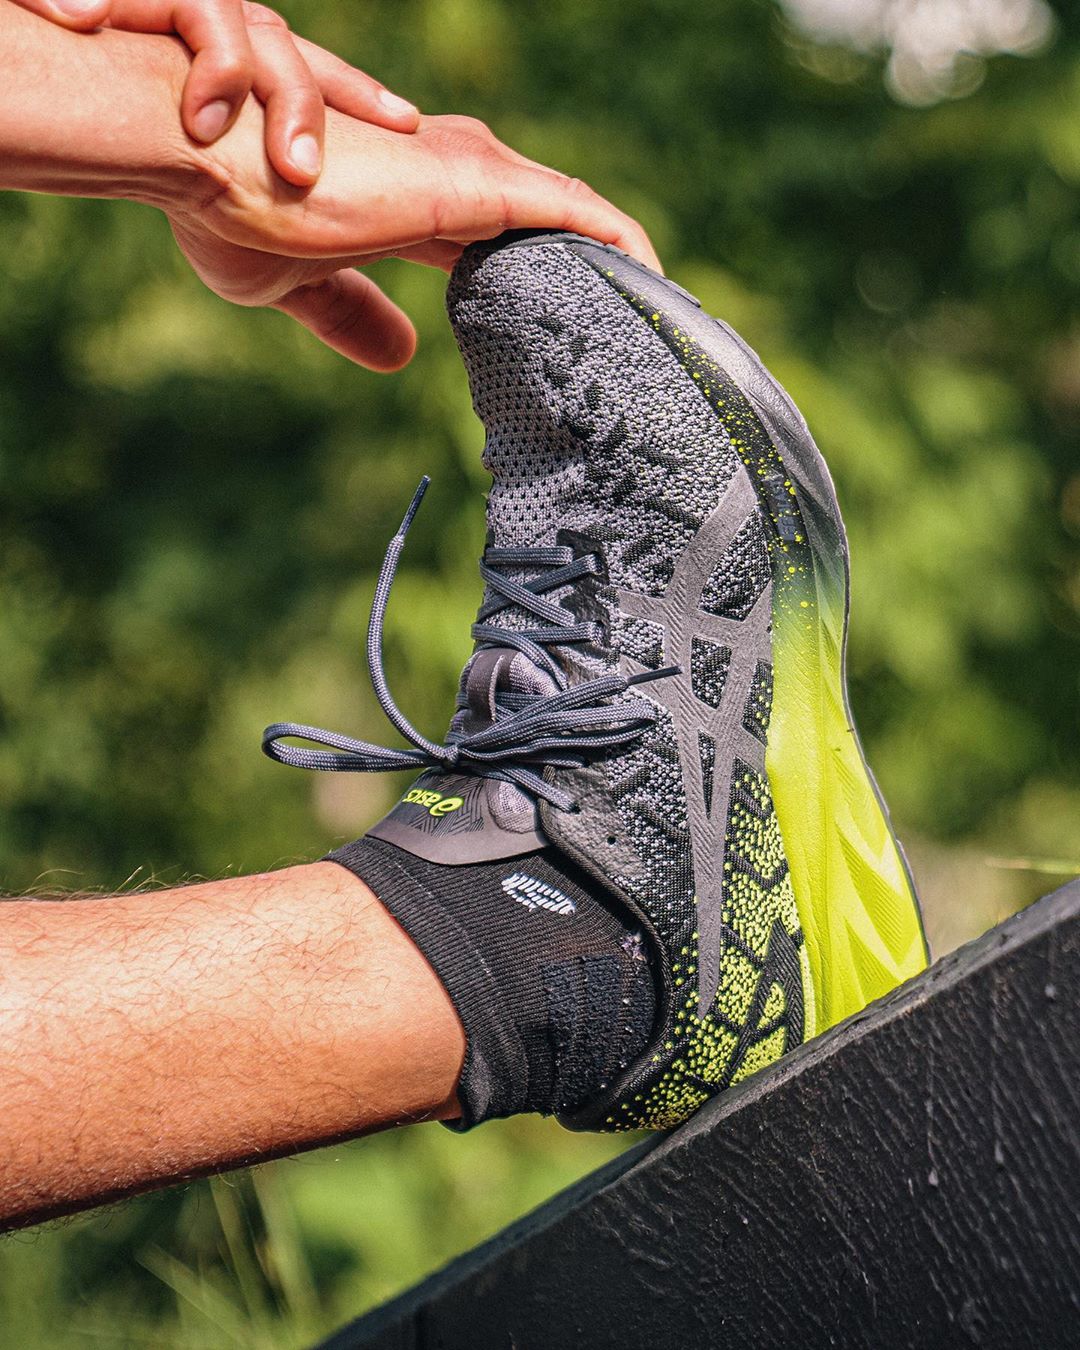 ASICS Europe - Like a gentle hug for your feet. 

#DYNABLAST fits perfectly to your foot shape ensuring a dynamic running experience. Available now.

💡 Learn more at the link in bio.
🛒 Tap the shoppin...